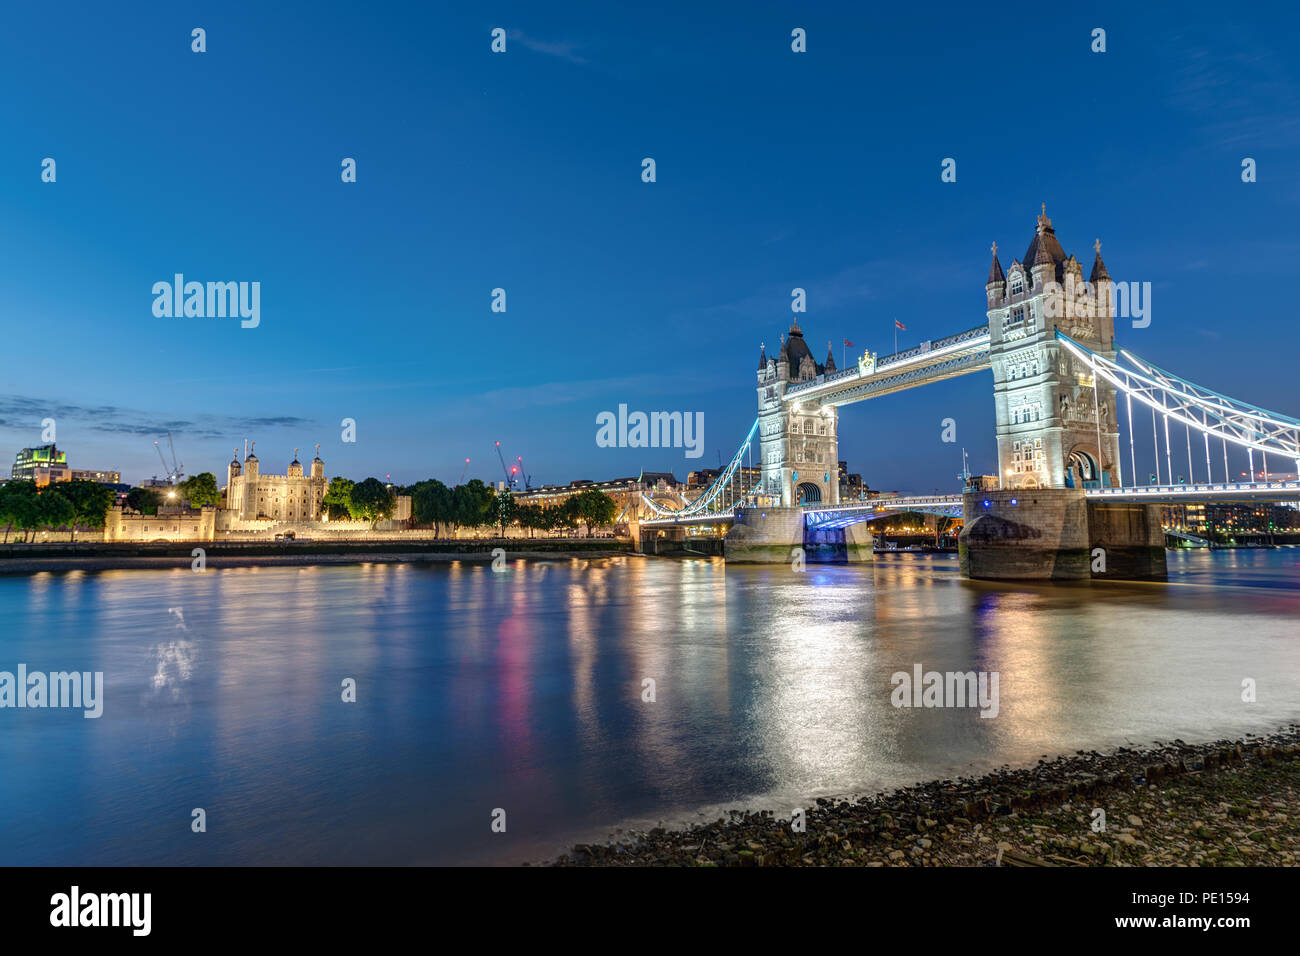 The Tower Bridge and the Tower of London at night Stock Photo